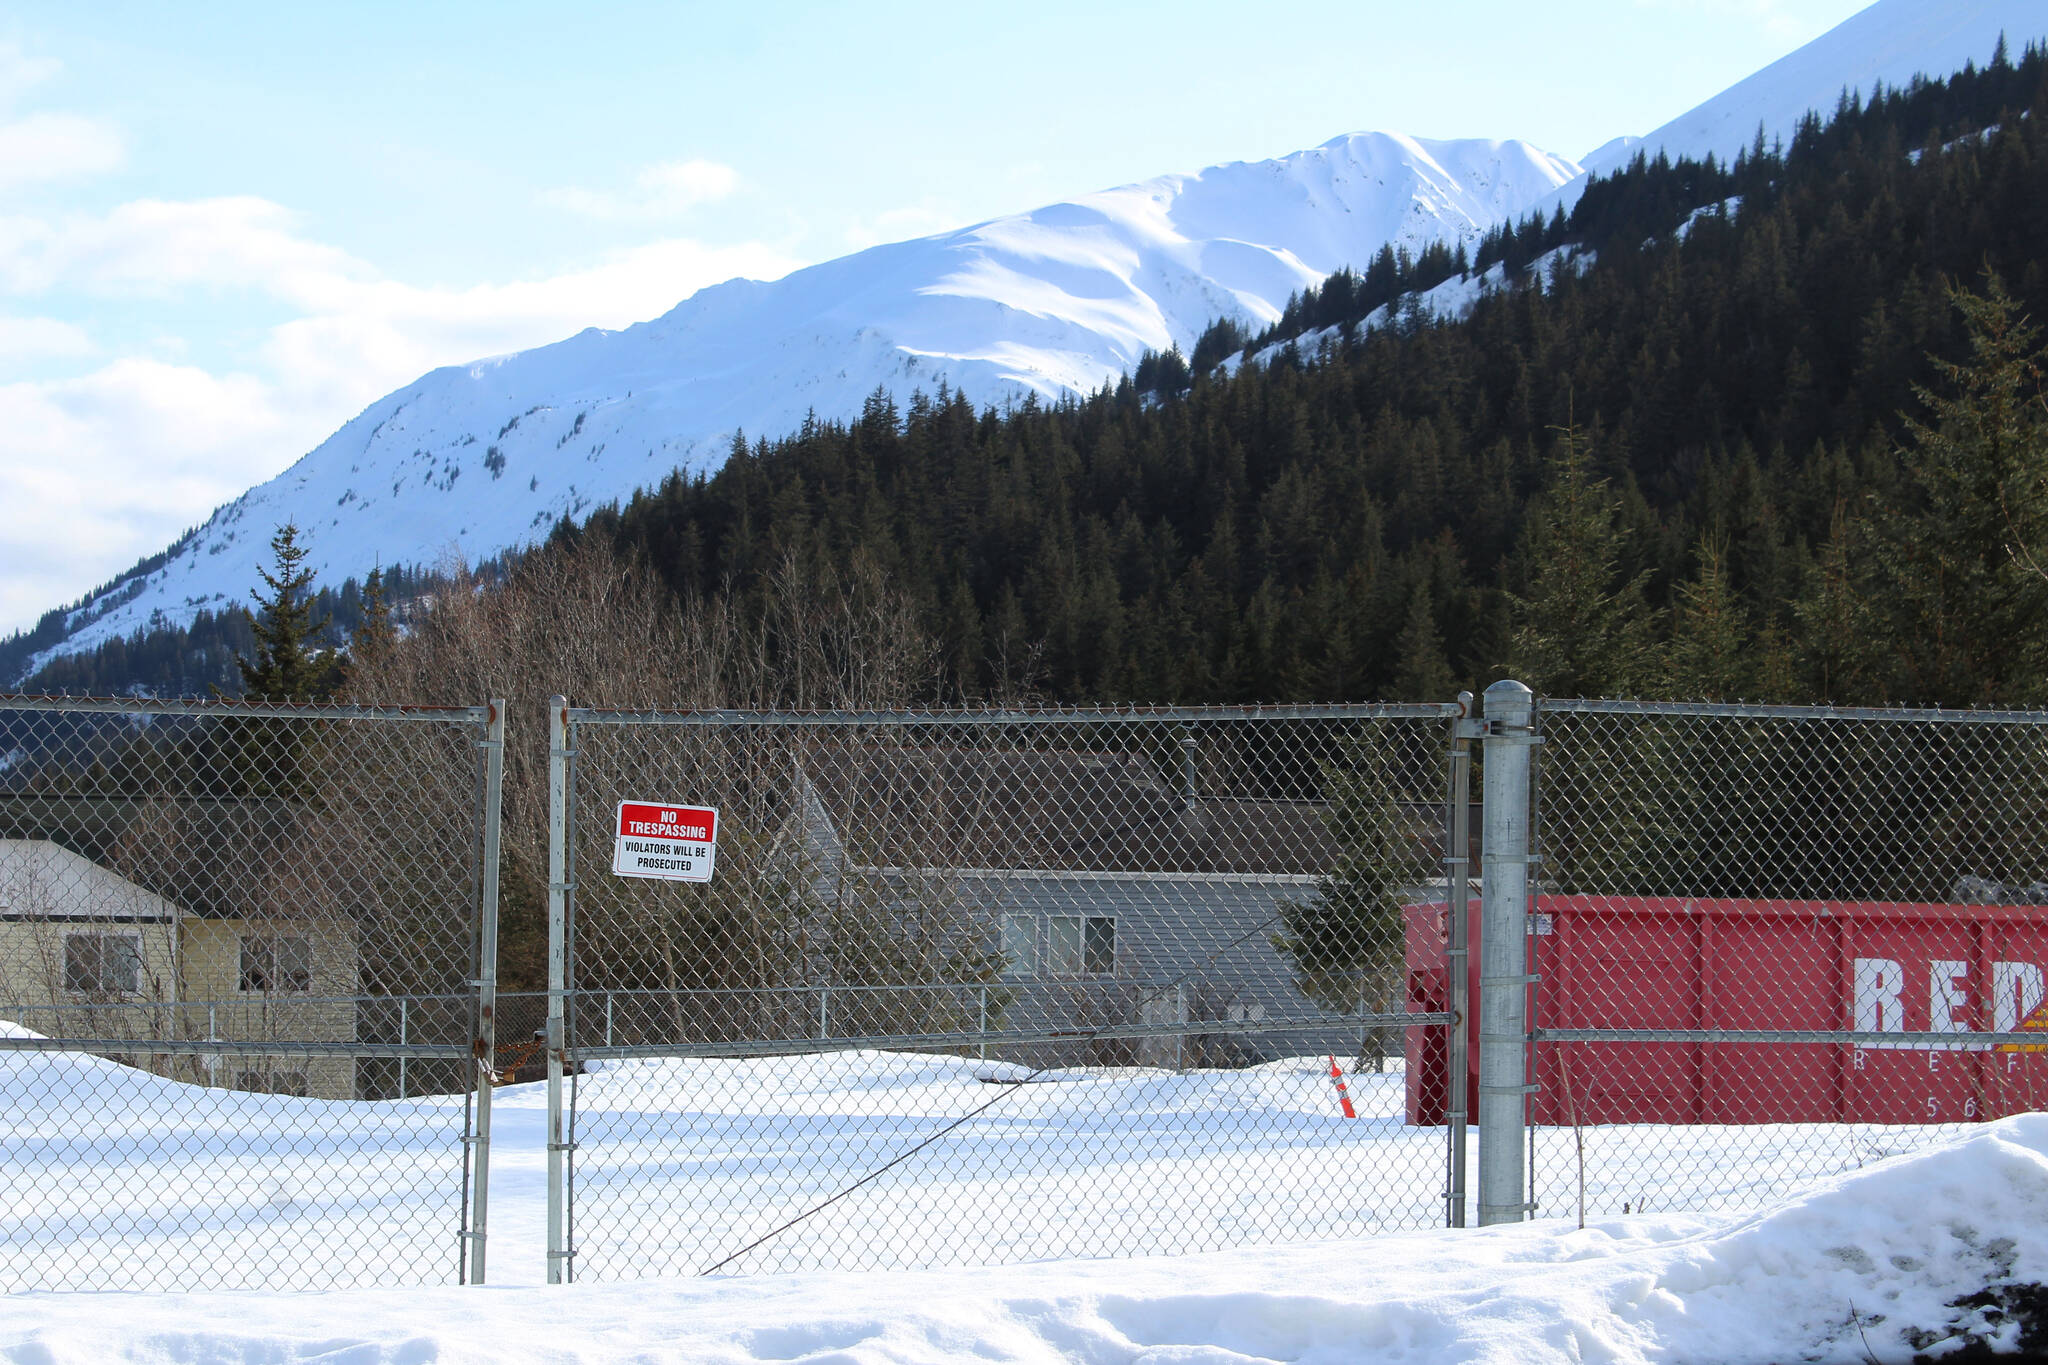 Chain link fencing outlines the site of the former Jesse Lee Home on Sunday, April 3, 2022, in Seward, Alaska. (Ashlyn O’Hara/Peninsula Clarion)